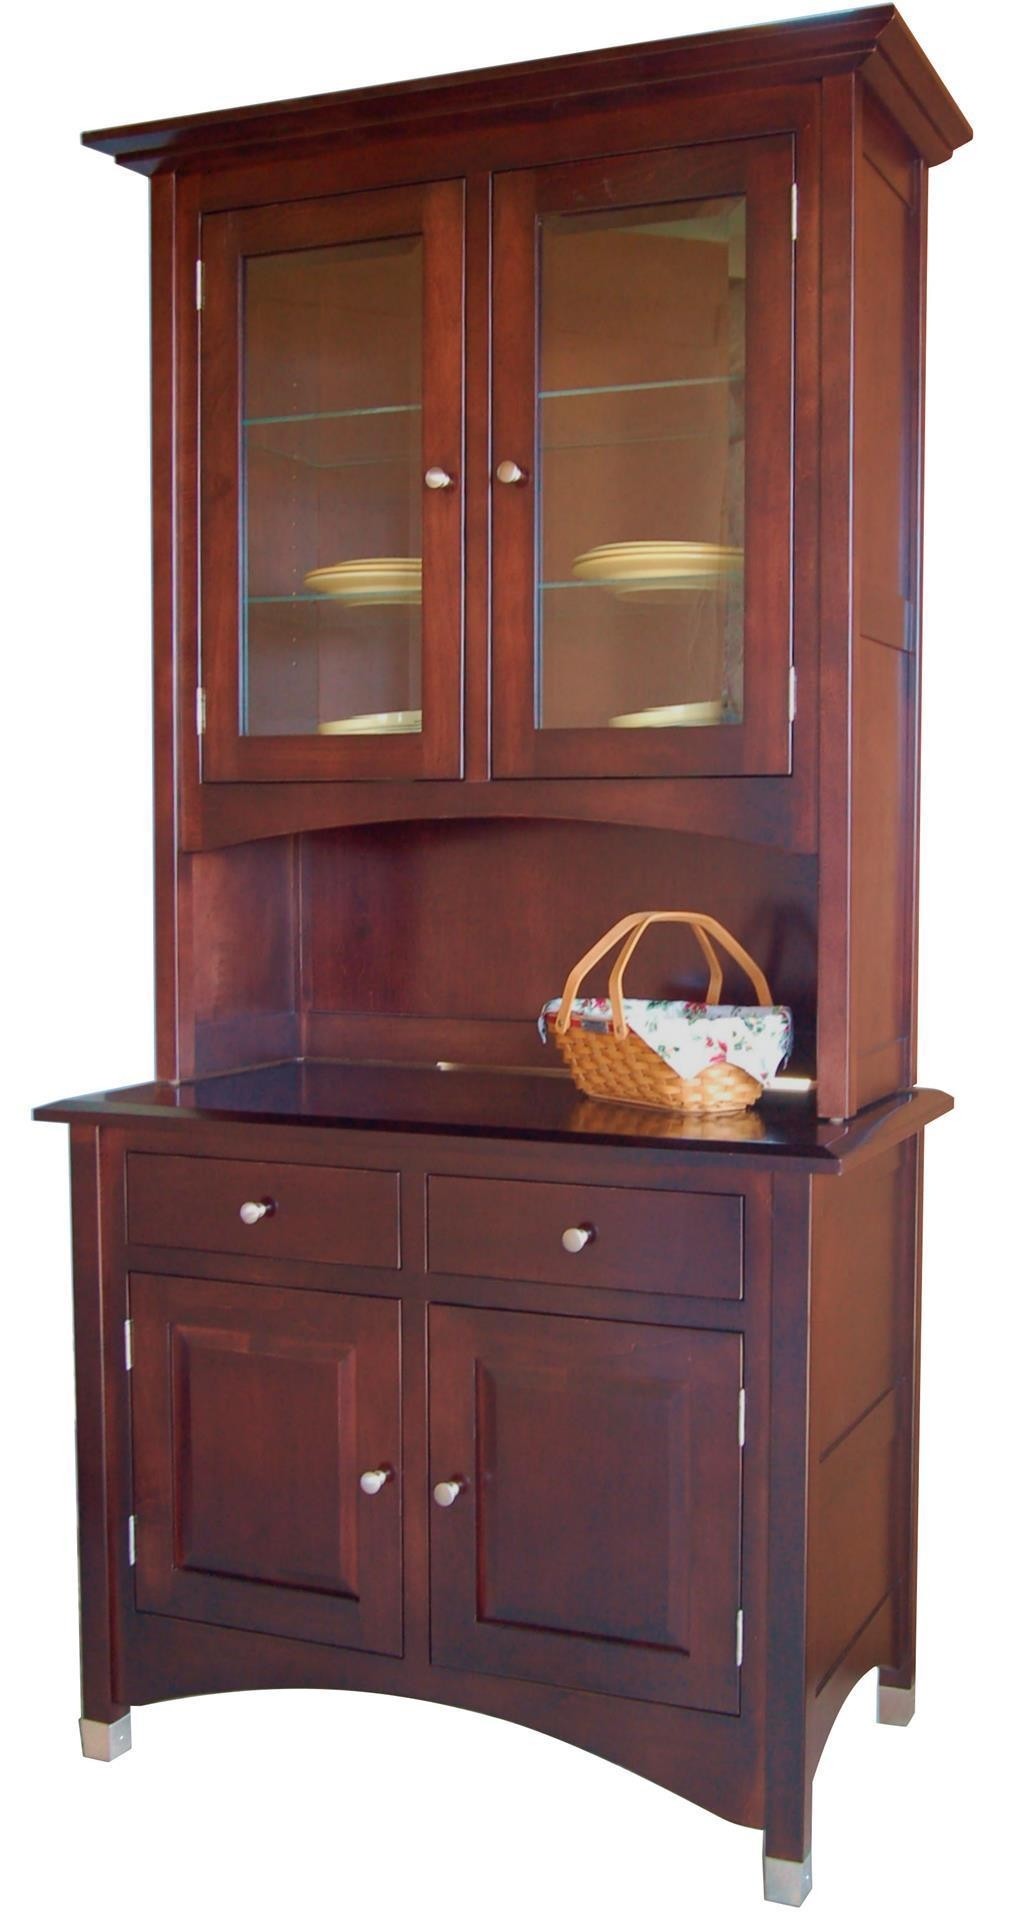 Lexington hutch and buffet from dutchcrafters amish furniture